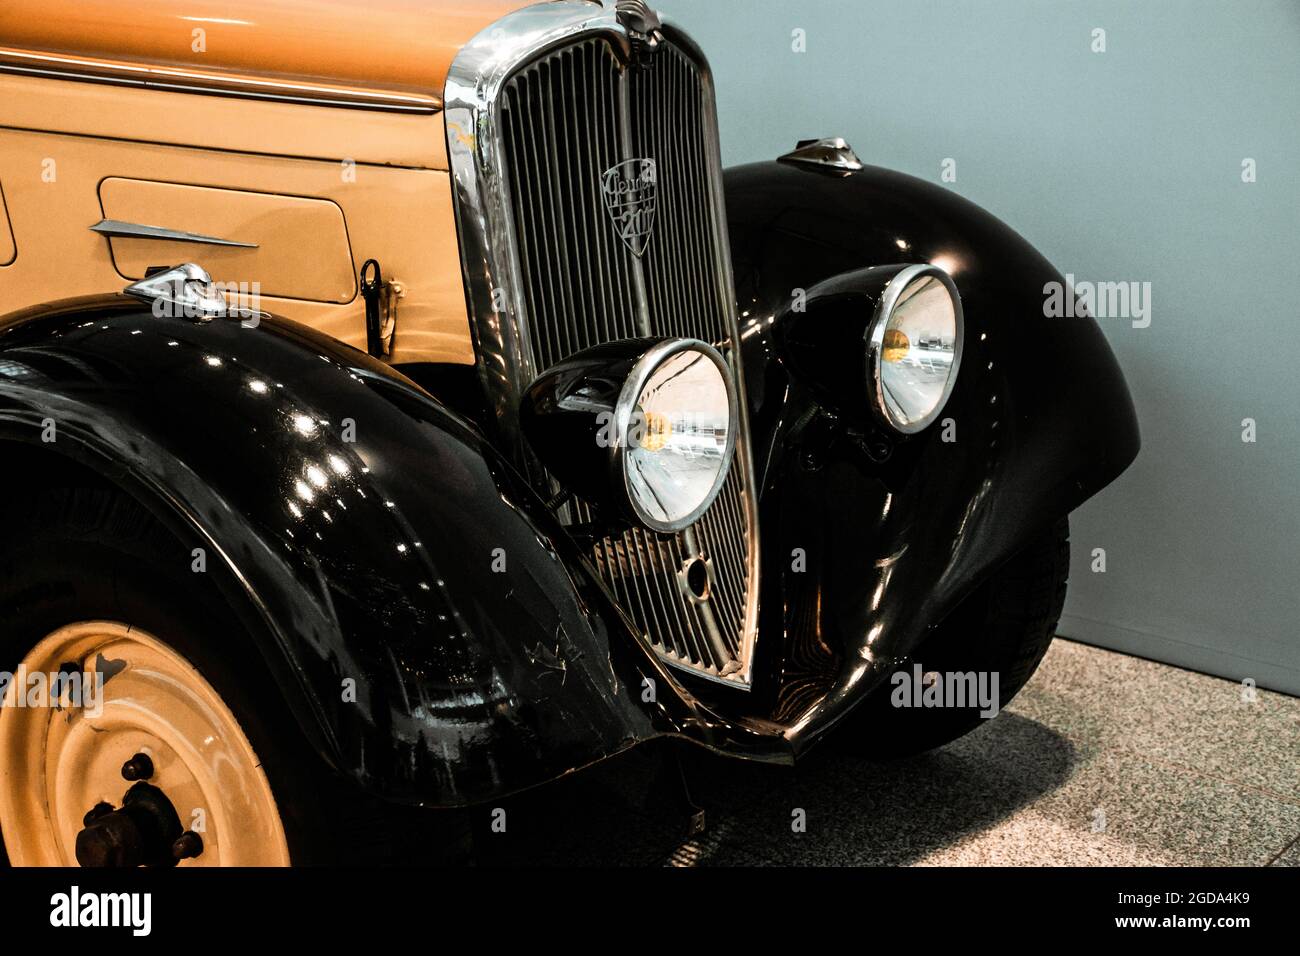 4 June 2019, Moscow, Russia: vehicle grille and headlights of french car Peugeot 201 BR 1933. Classical retro cars of 1920s. Stock Photo